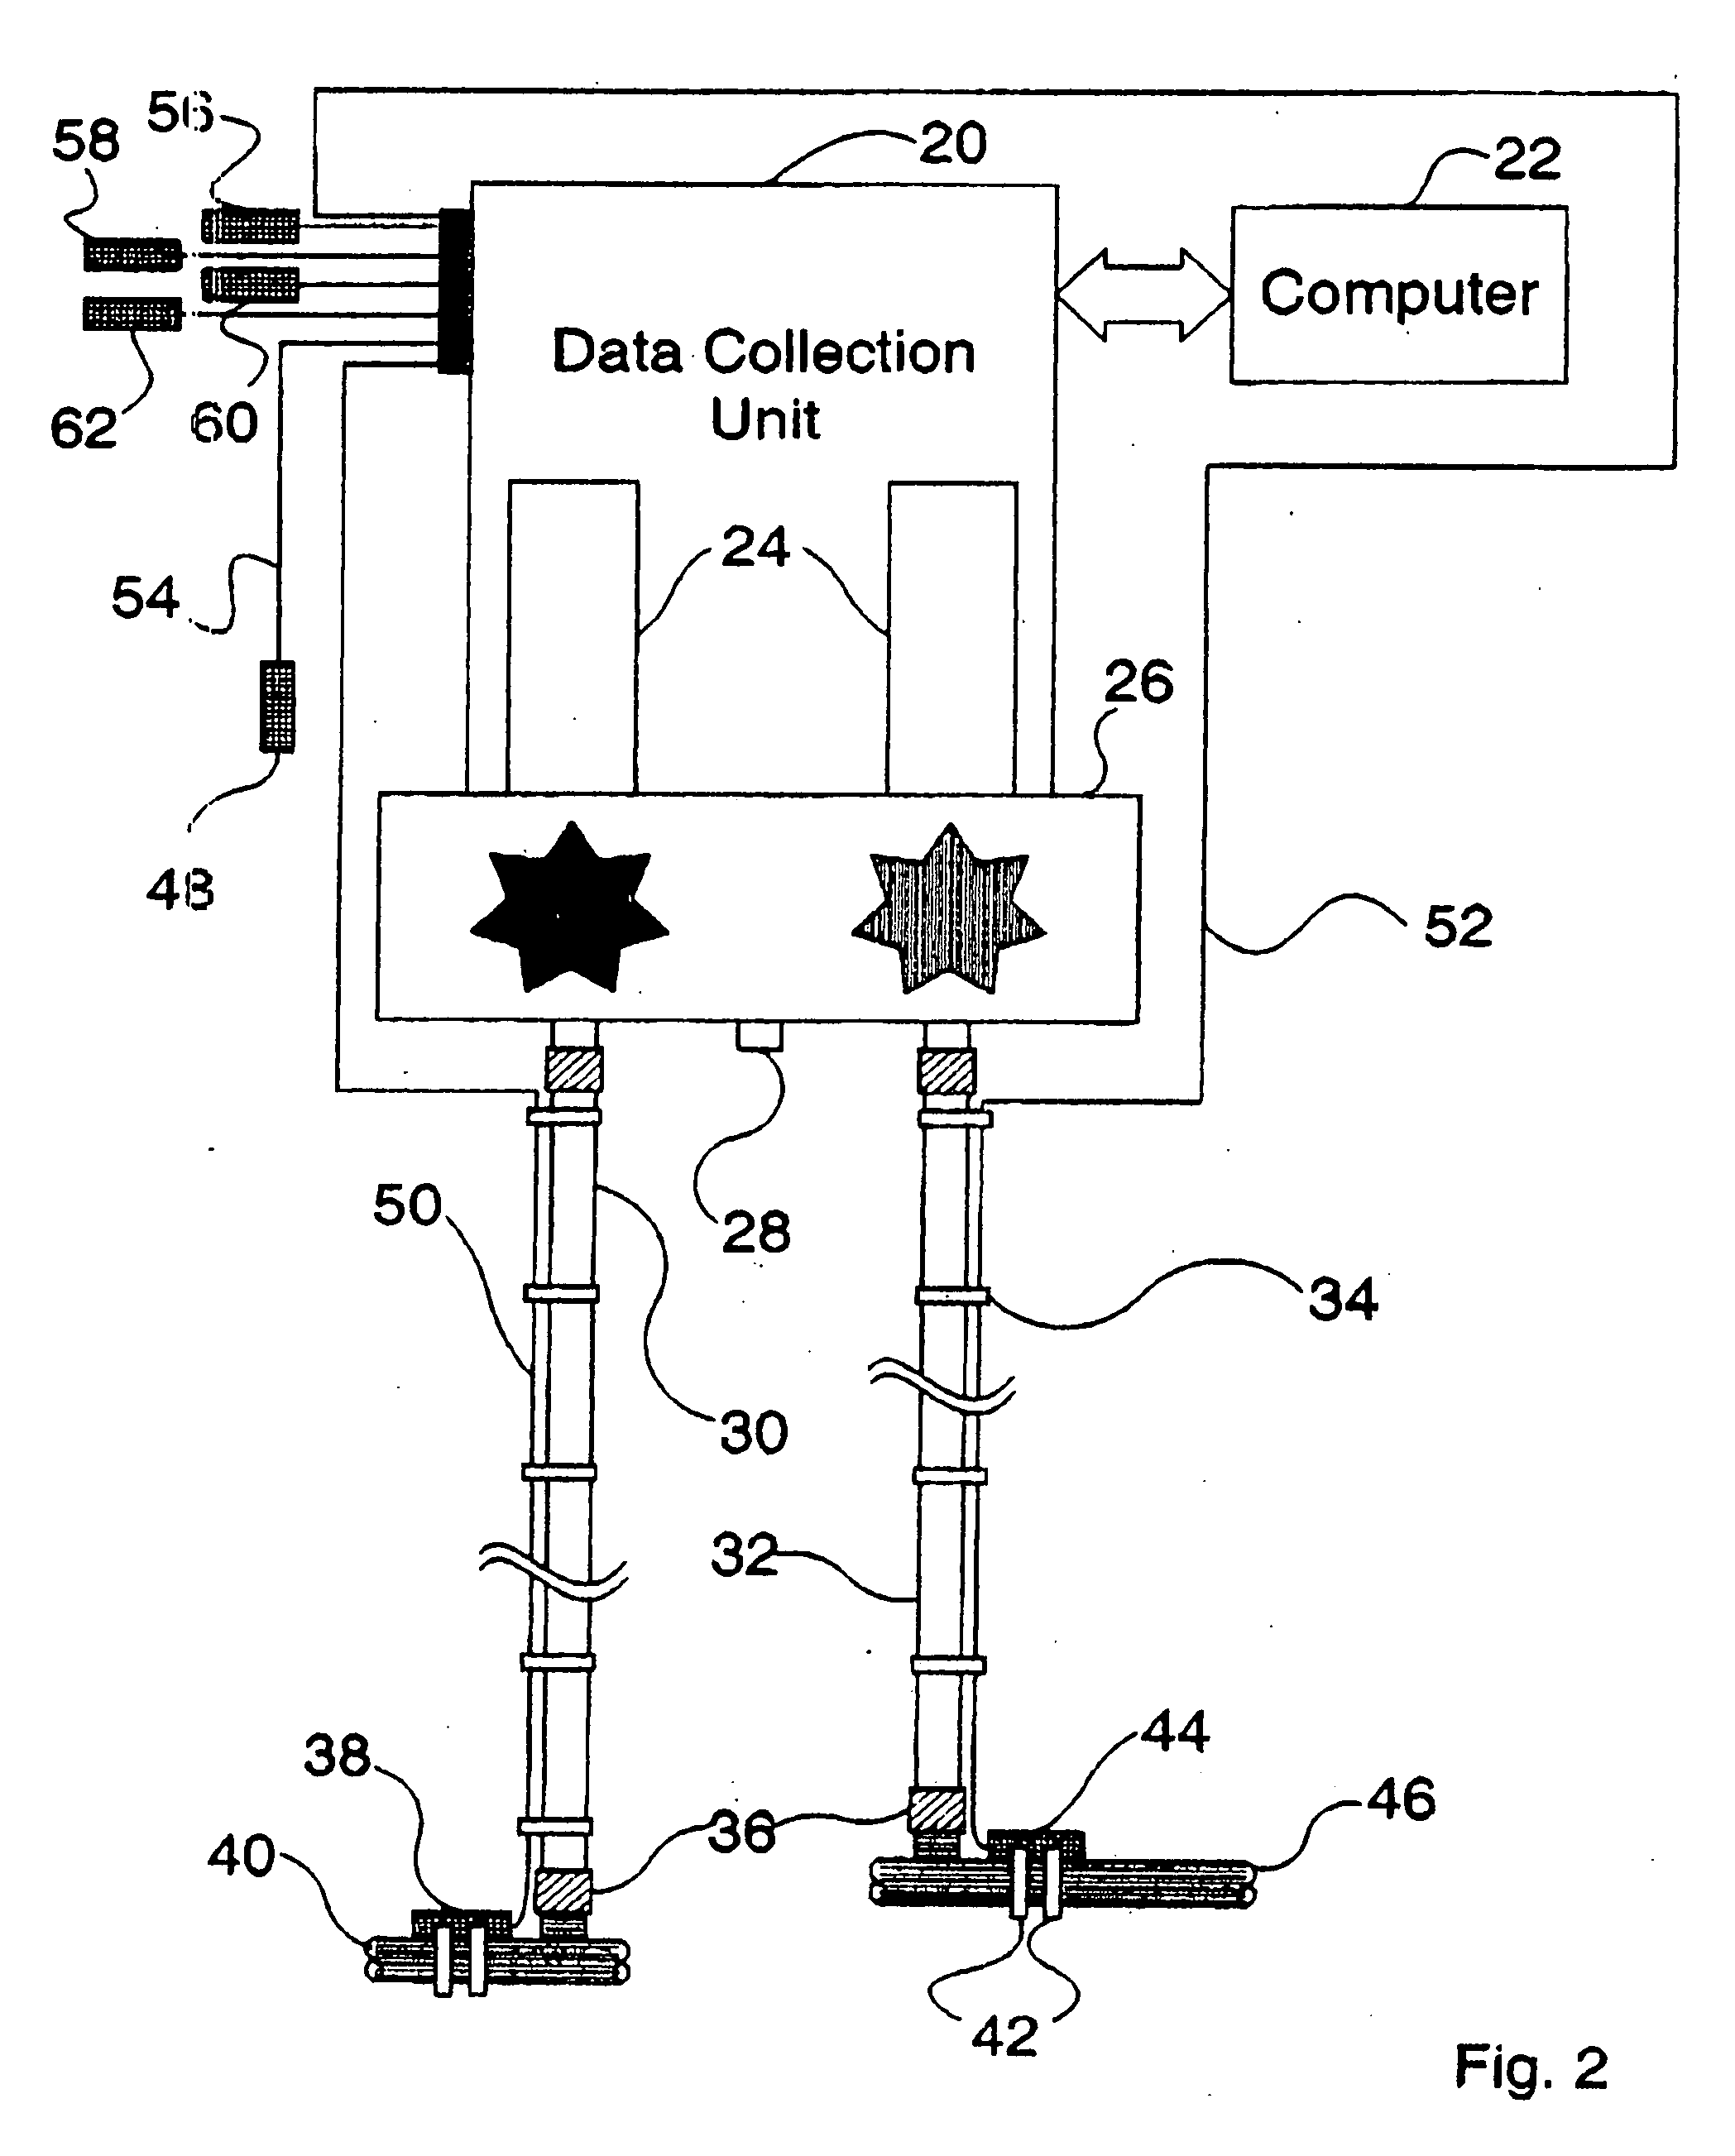 Apparatus and method for detecting faults and providing diagnostics in vapor compression cycle equipment